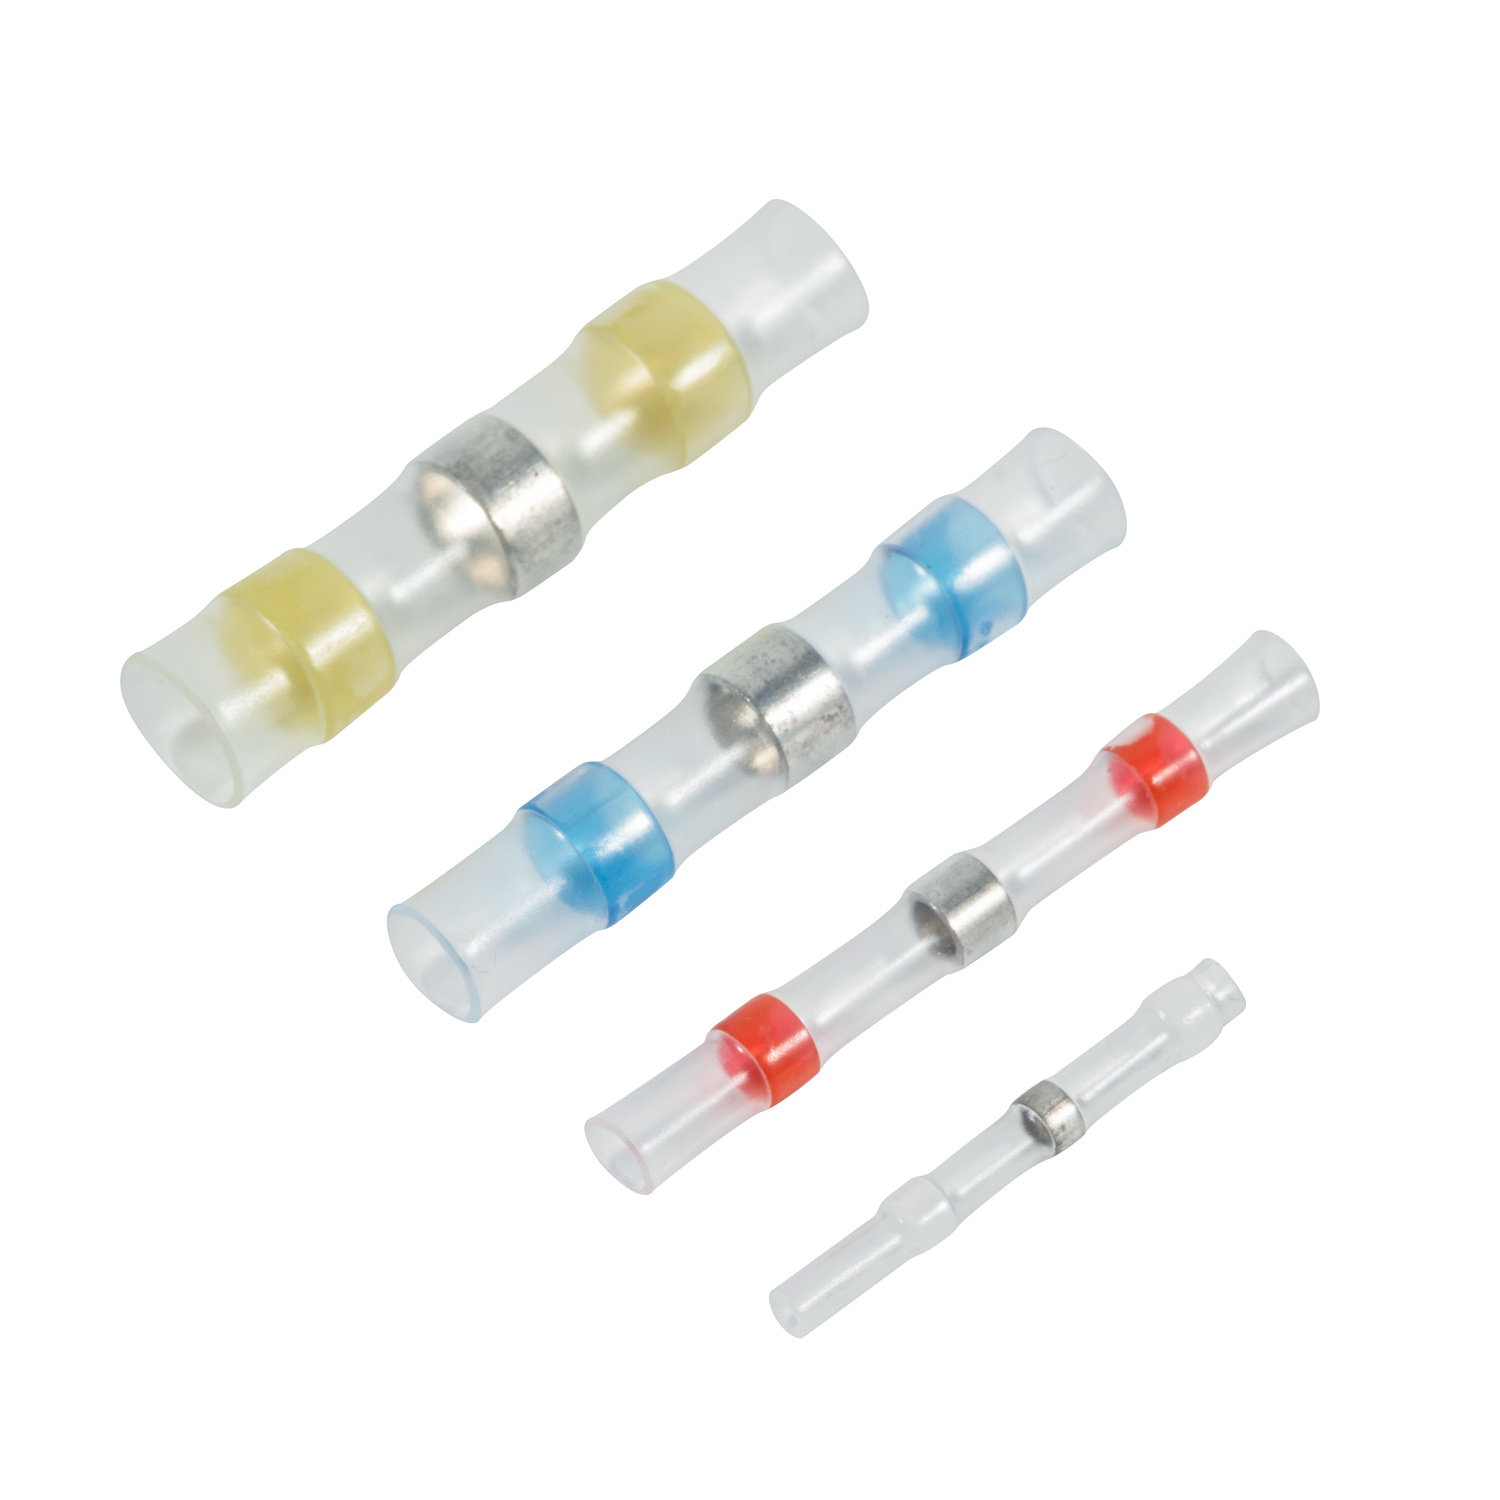 European Standard Heat Shrink Solder Seal Wire Connectors with CE RoHS